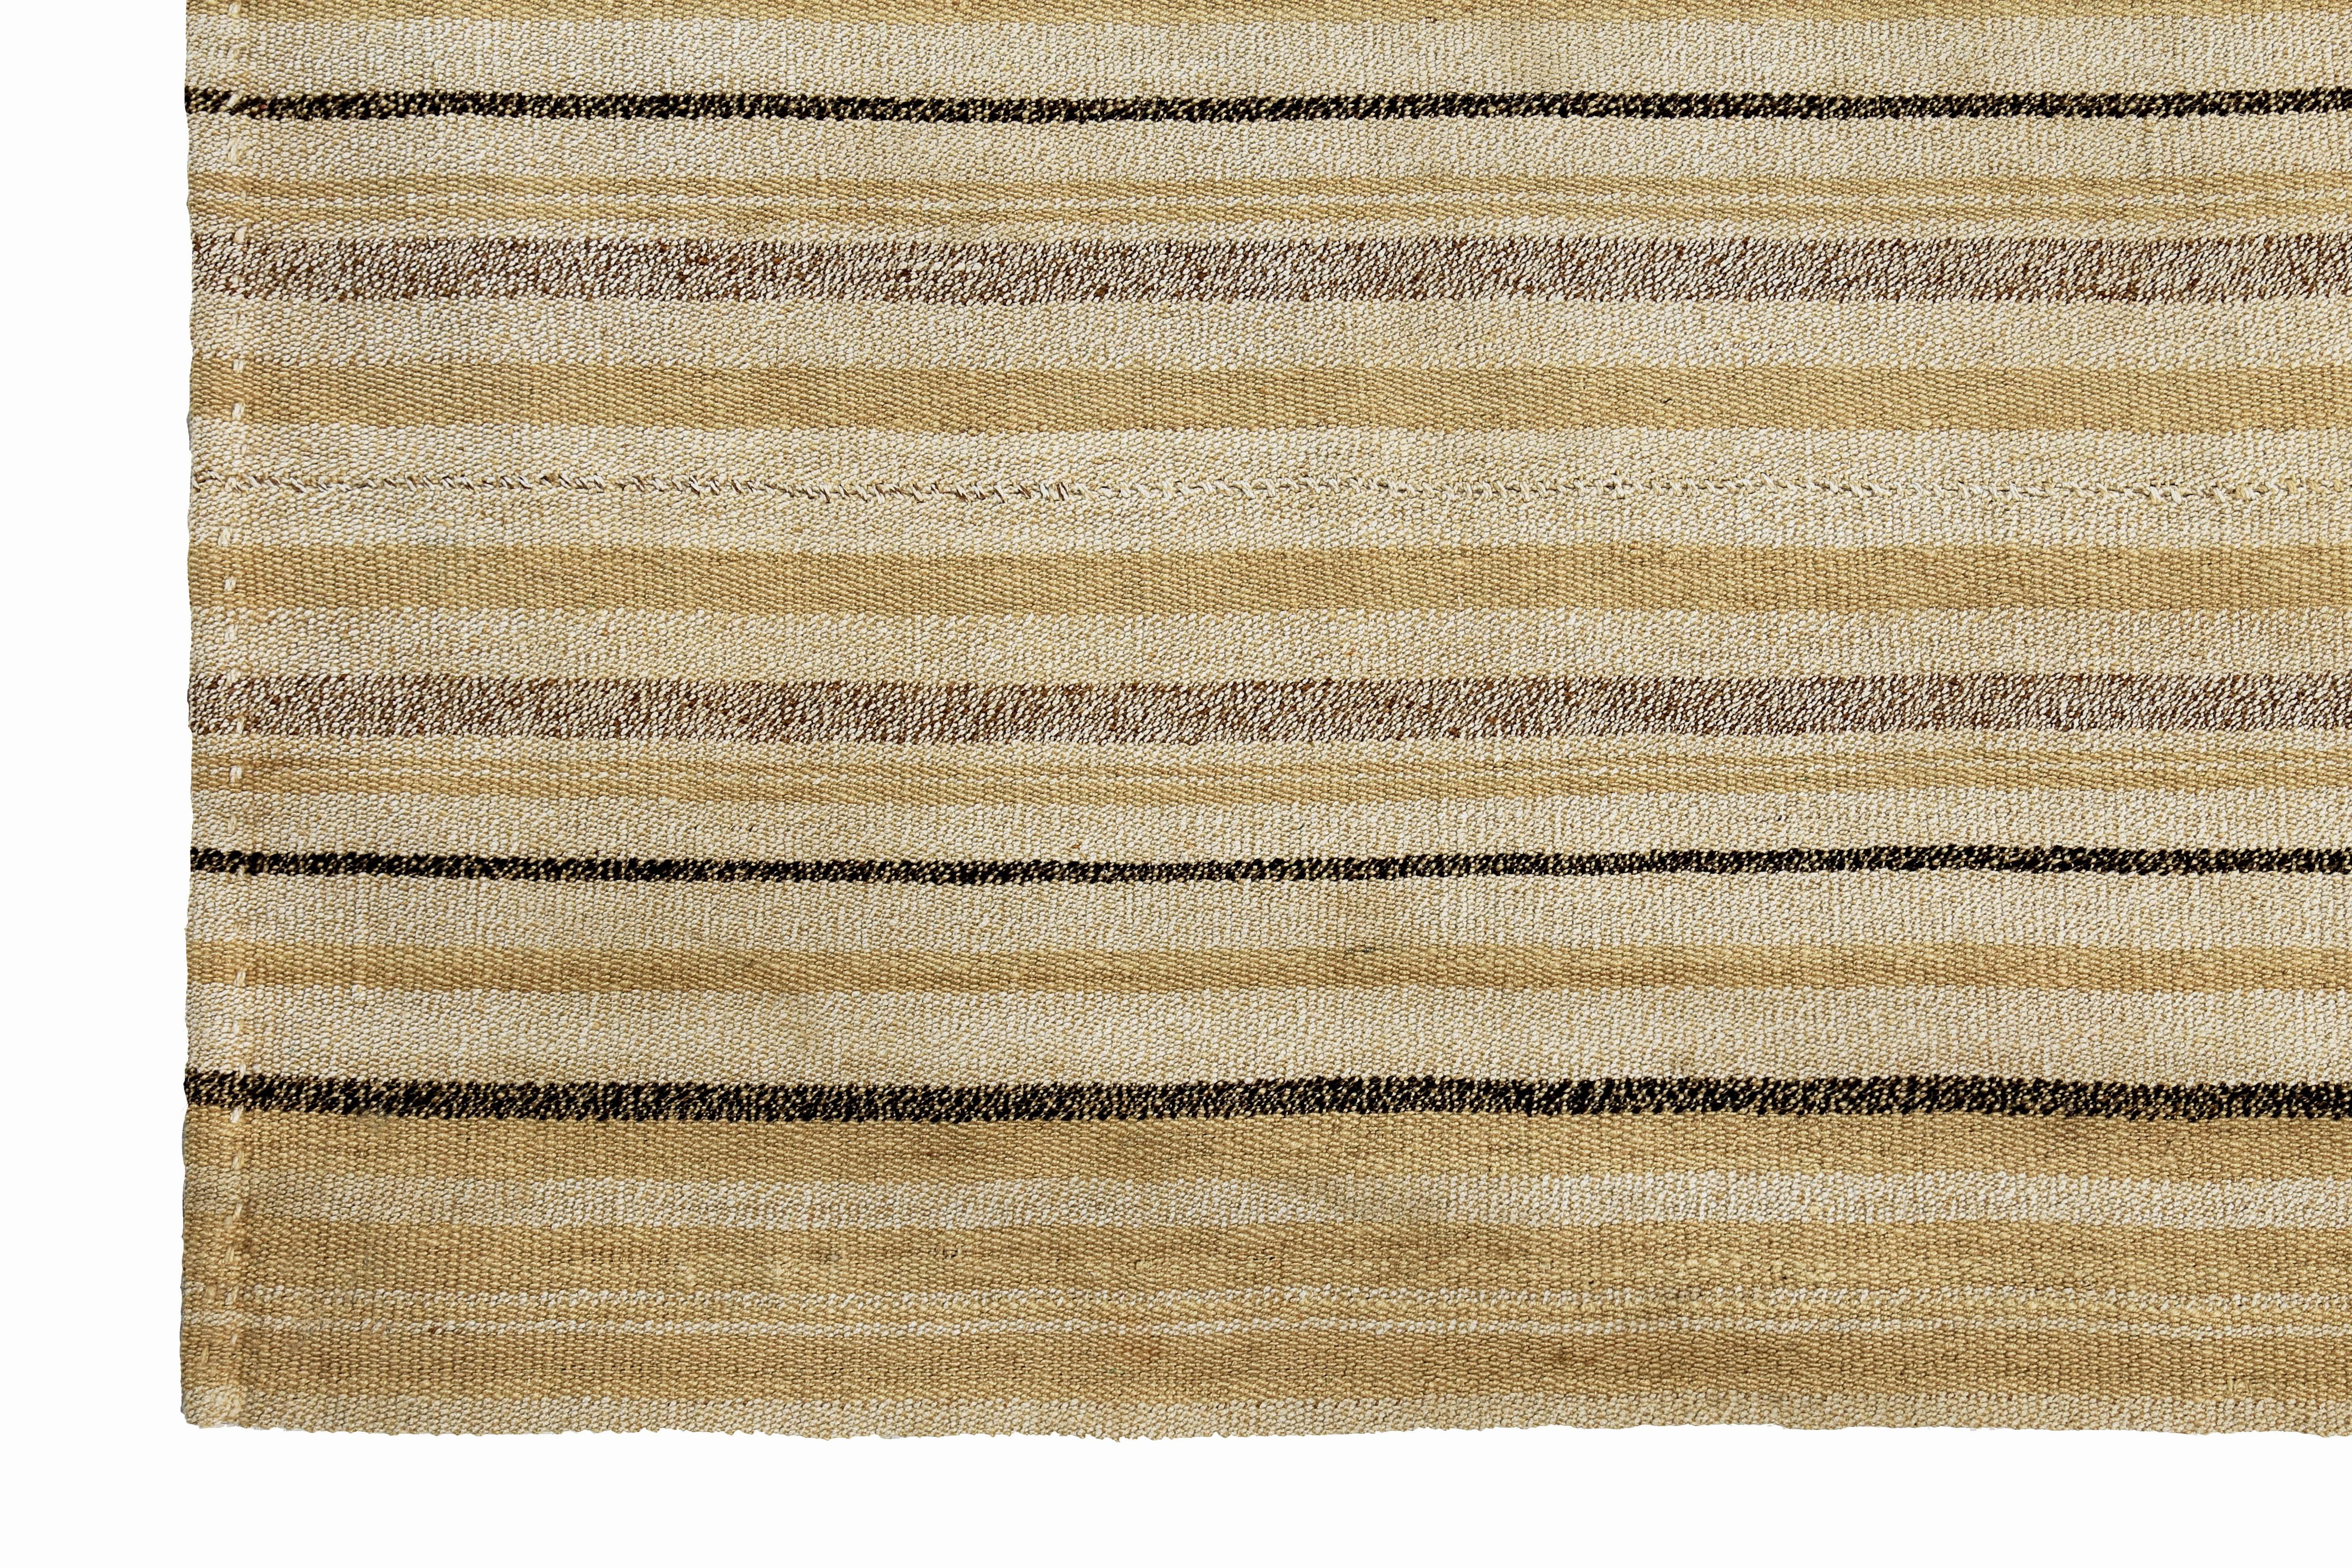 Hand-Woven Turkish Kilim Runner Rug with Black & Ivory Stripes on Beige Field For Sale